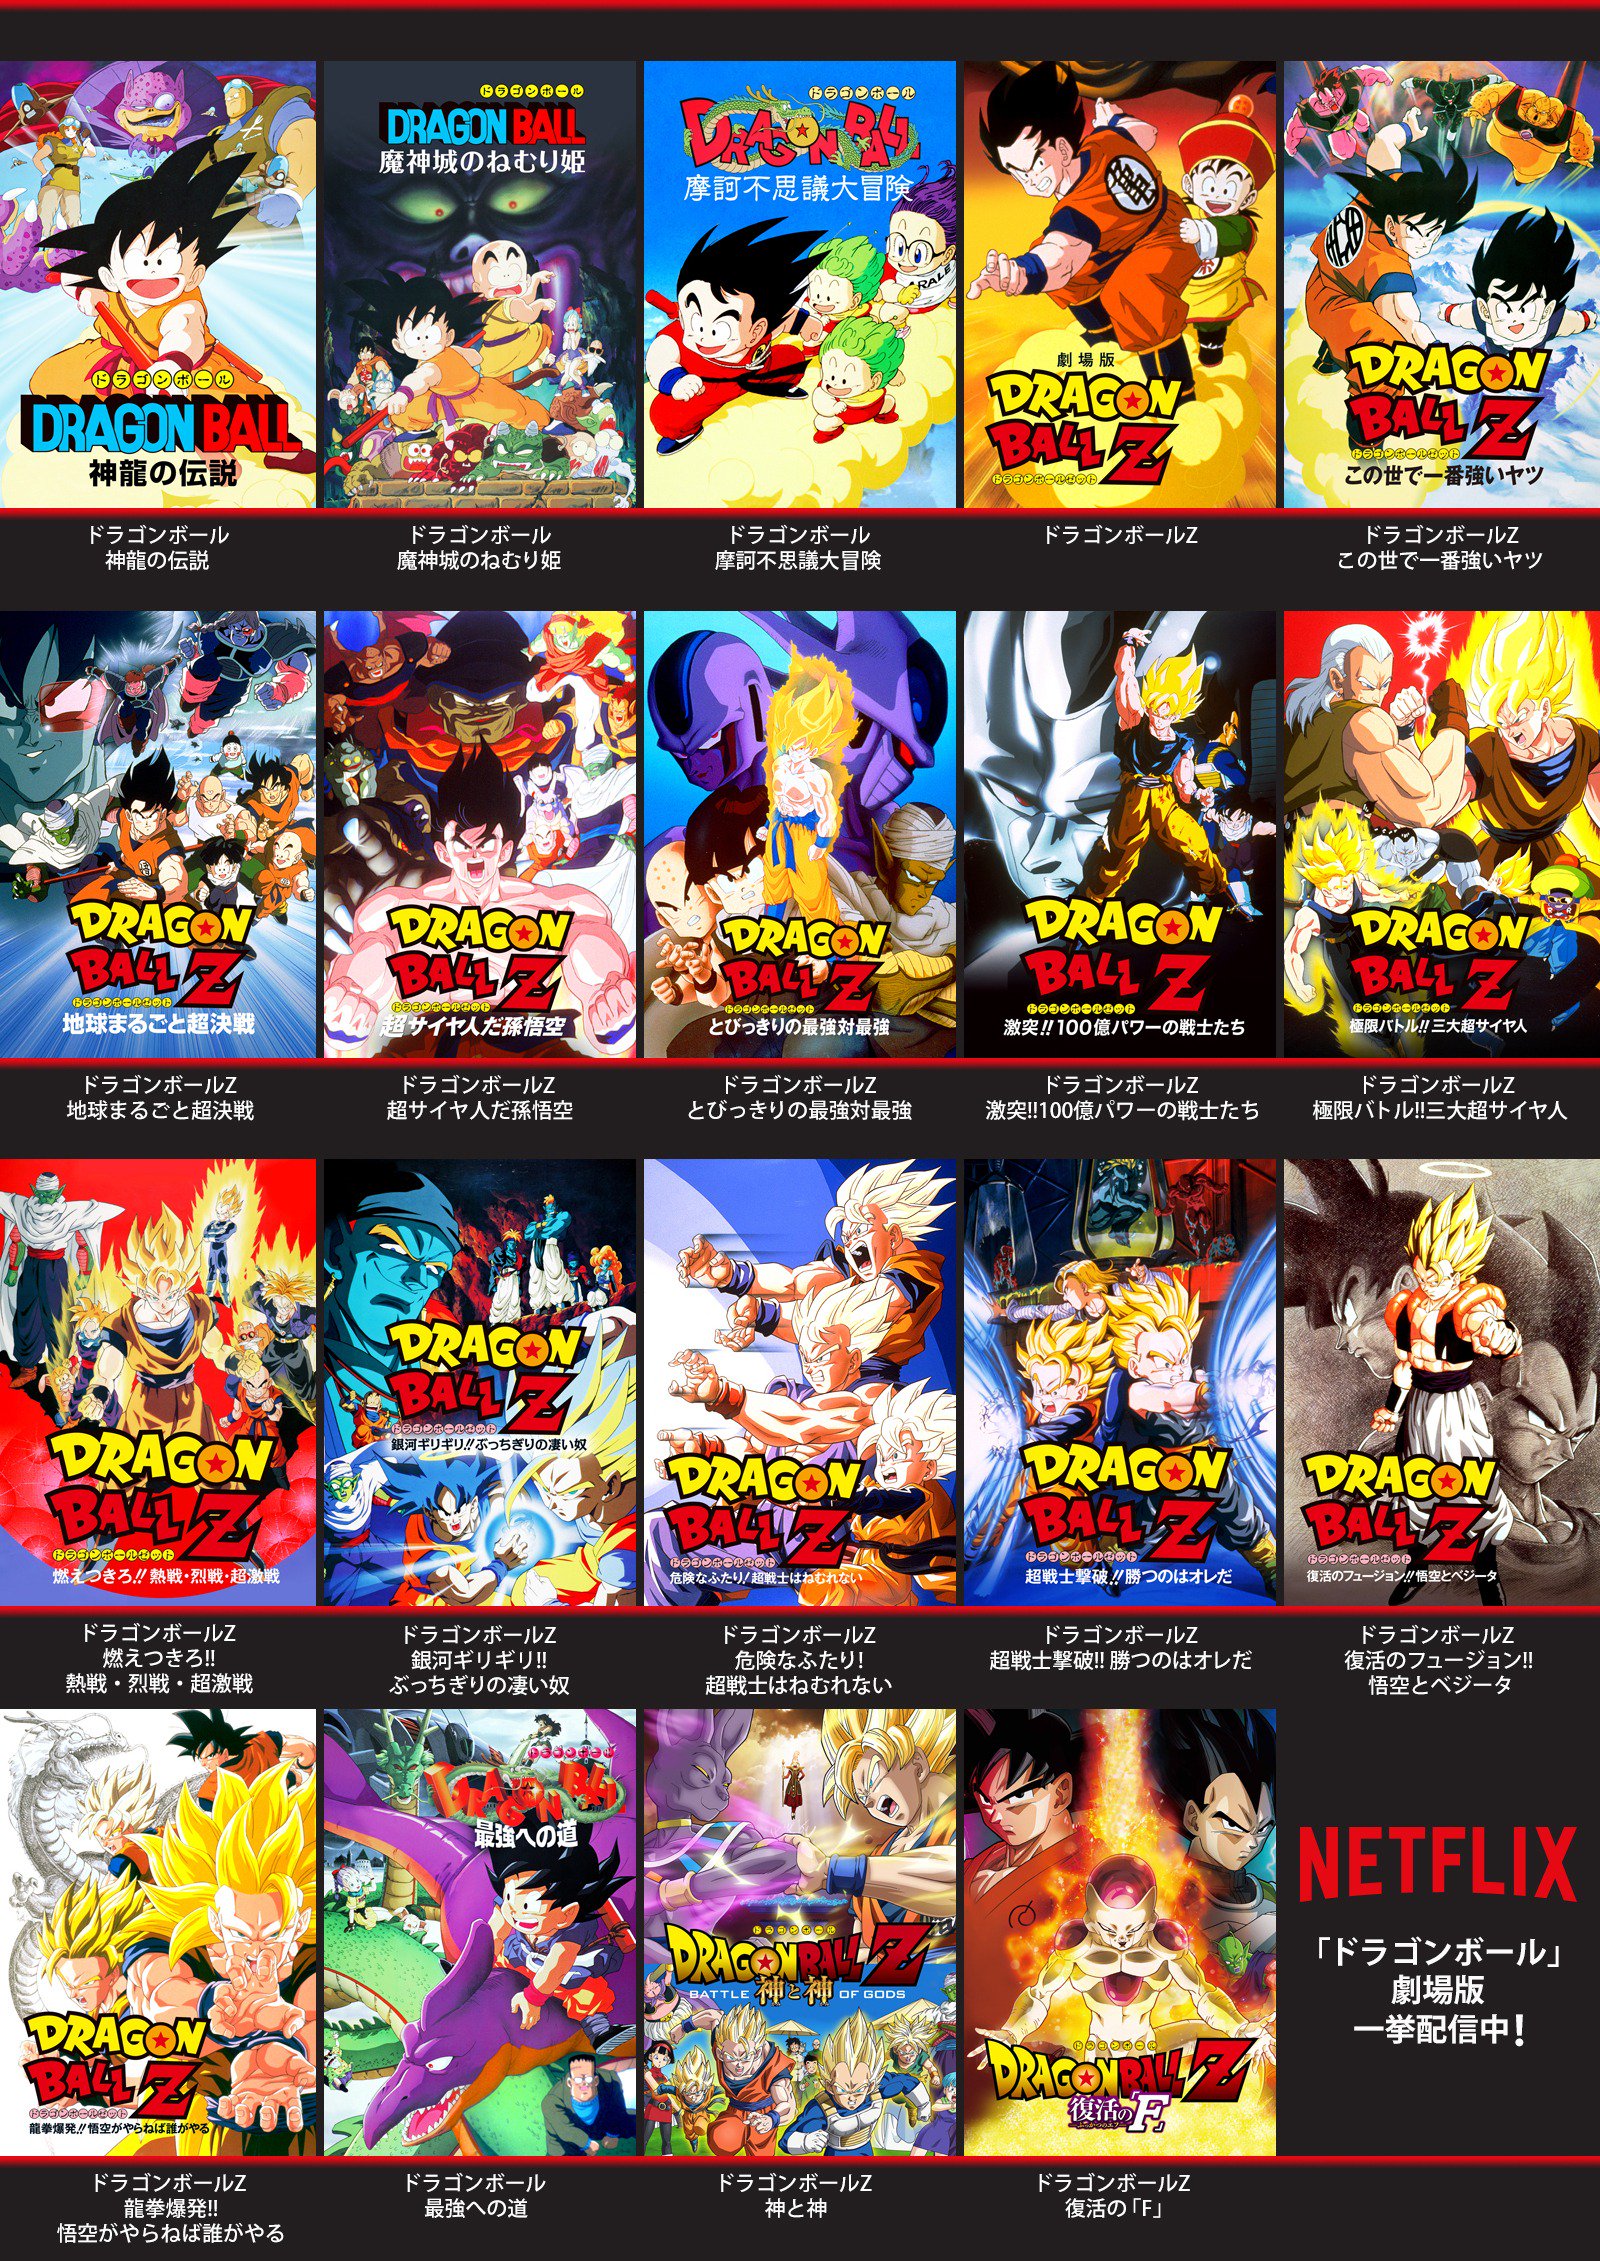 News Unannounced New Dragon Ball Dragon Ball Z Theatrical Film Remasters Hit Japanese Streaming Services